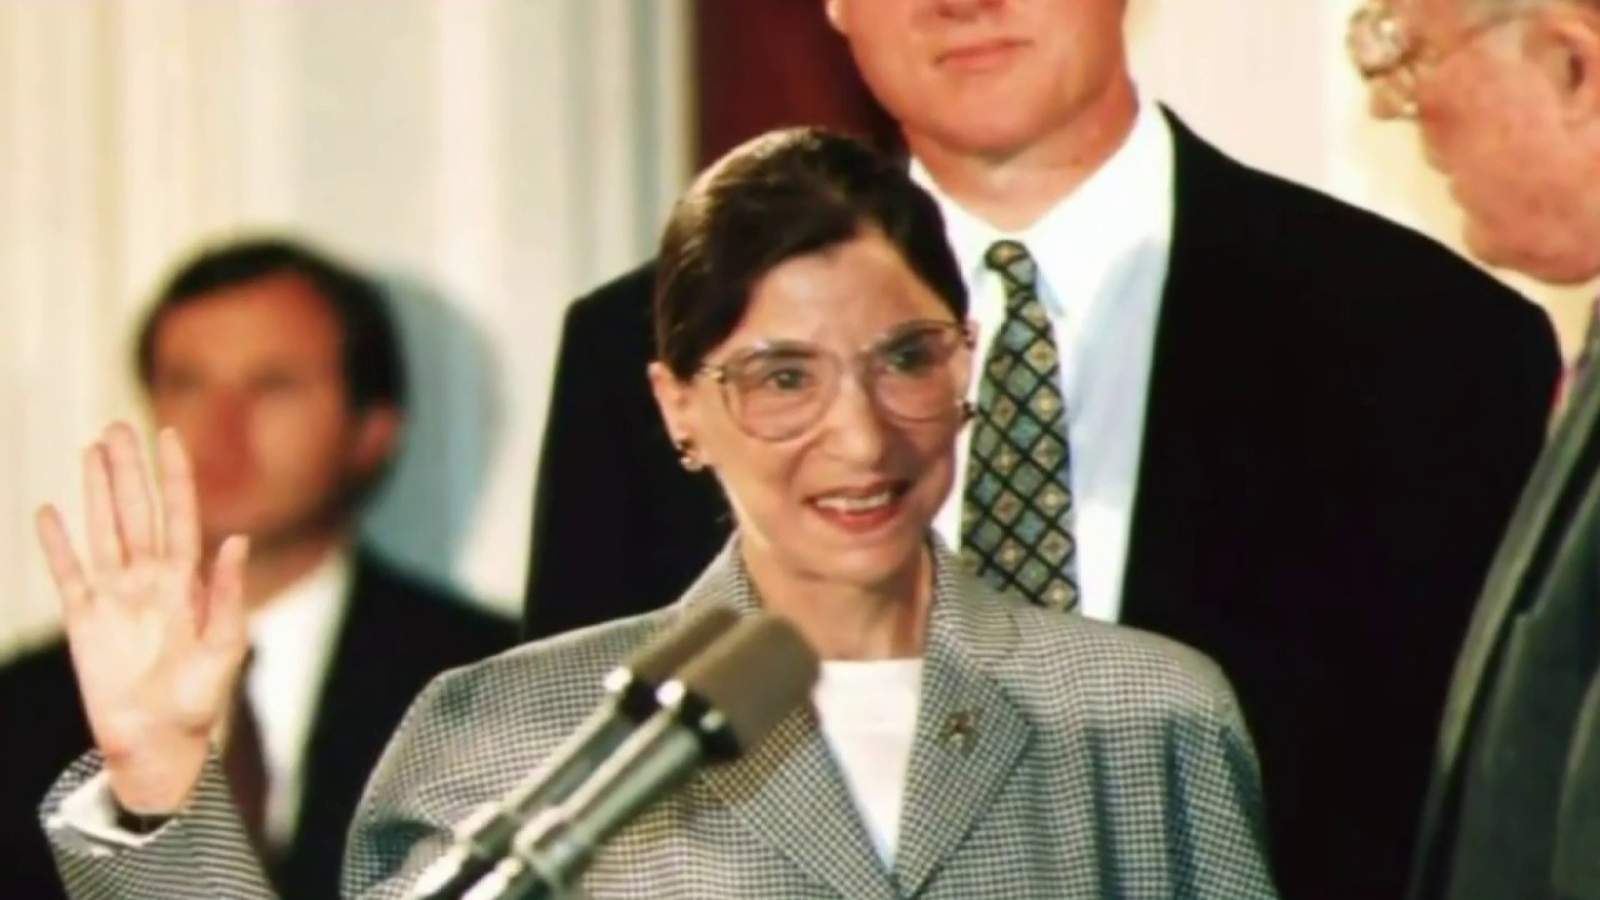 MDHHS director shares memories with Supreme Court Justice Ruth Bader Ginsburg